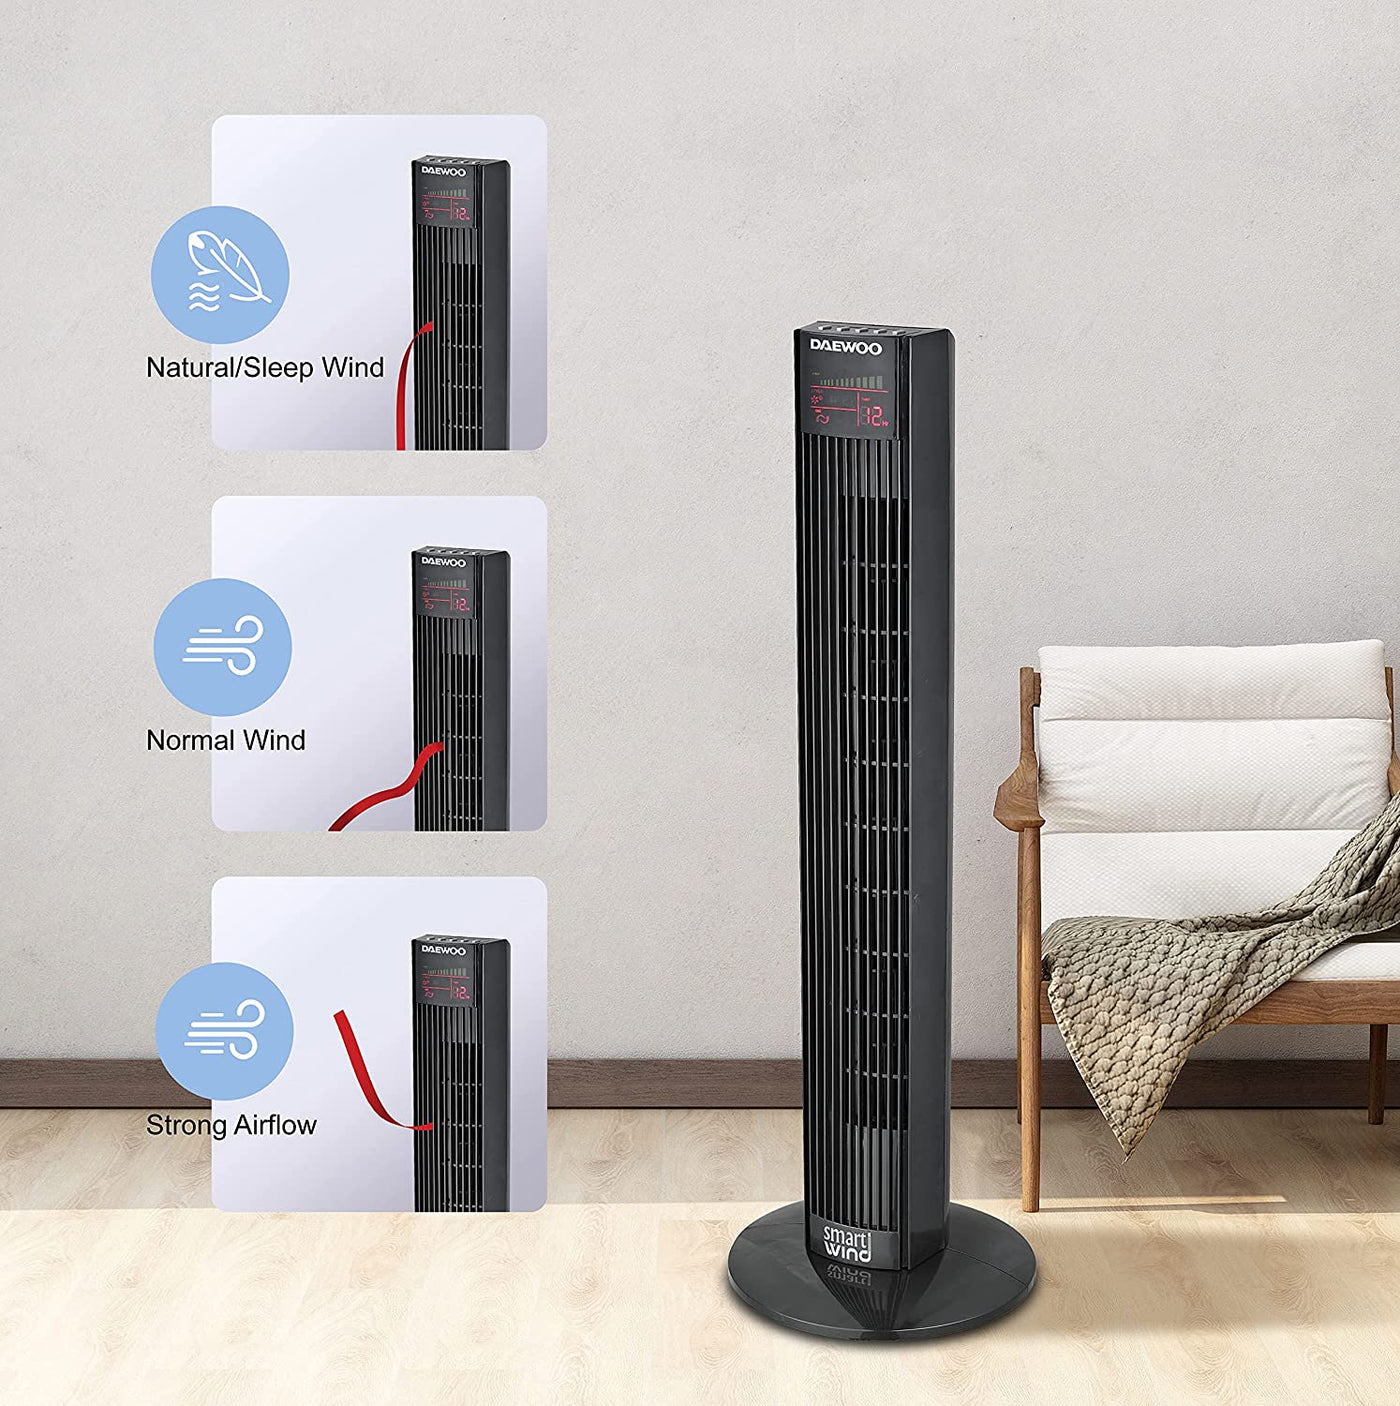 Brown Box 36 inch Digital Tower Fan with Remote, Timer, Oscillation, 3 Fan Speeds & 3 Wind Modes